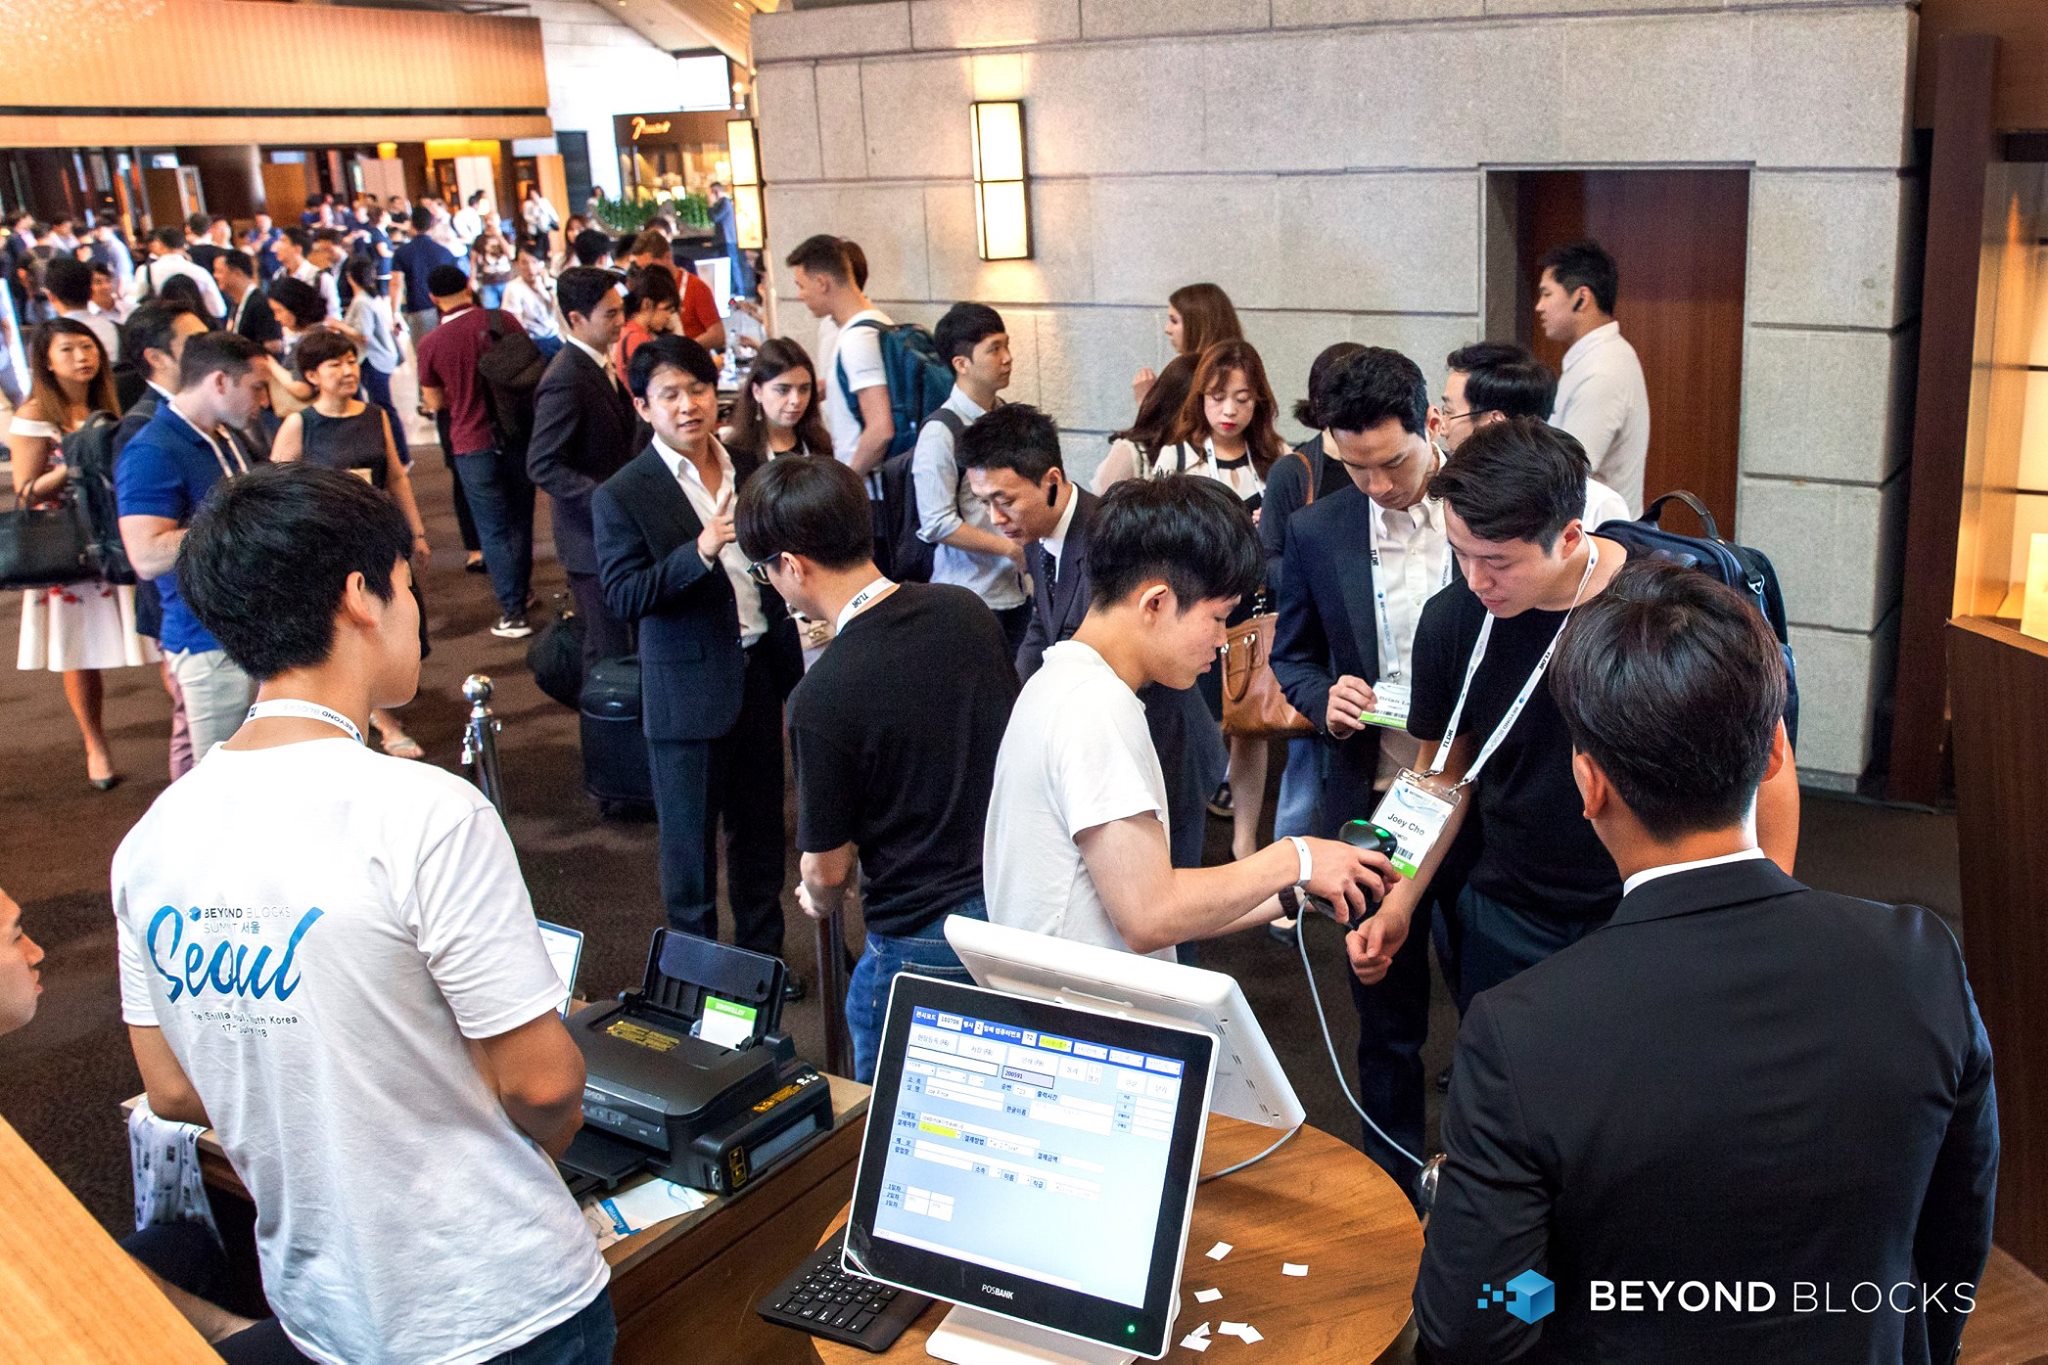 One of the world’s largest blockchain conferences, the Beyond Blocks summit is focused on real business issues that help blockchain companies develop into genuine tech startups. (Photo: Beyond Blocks)